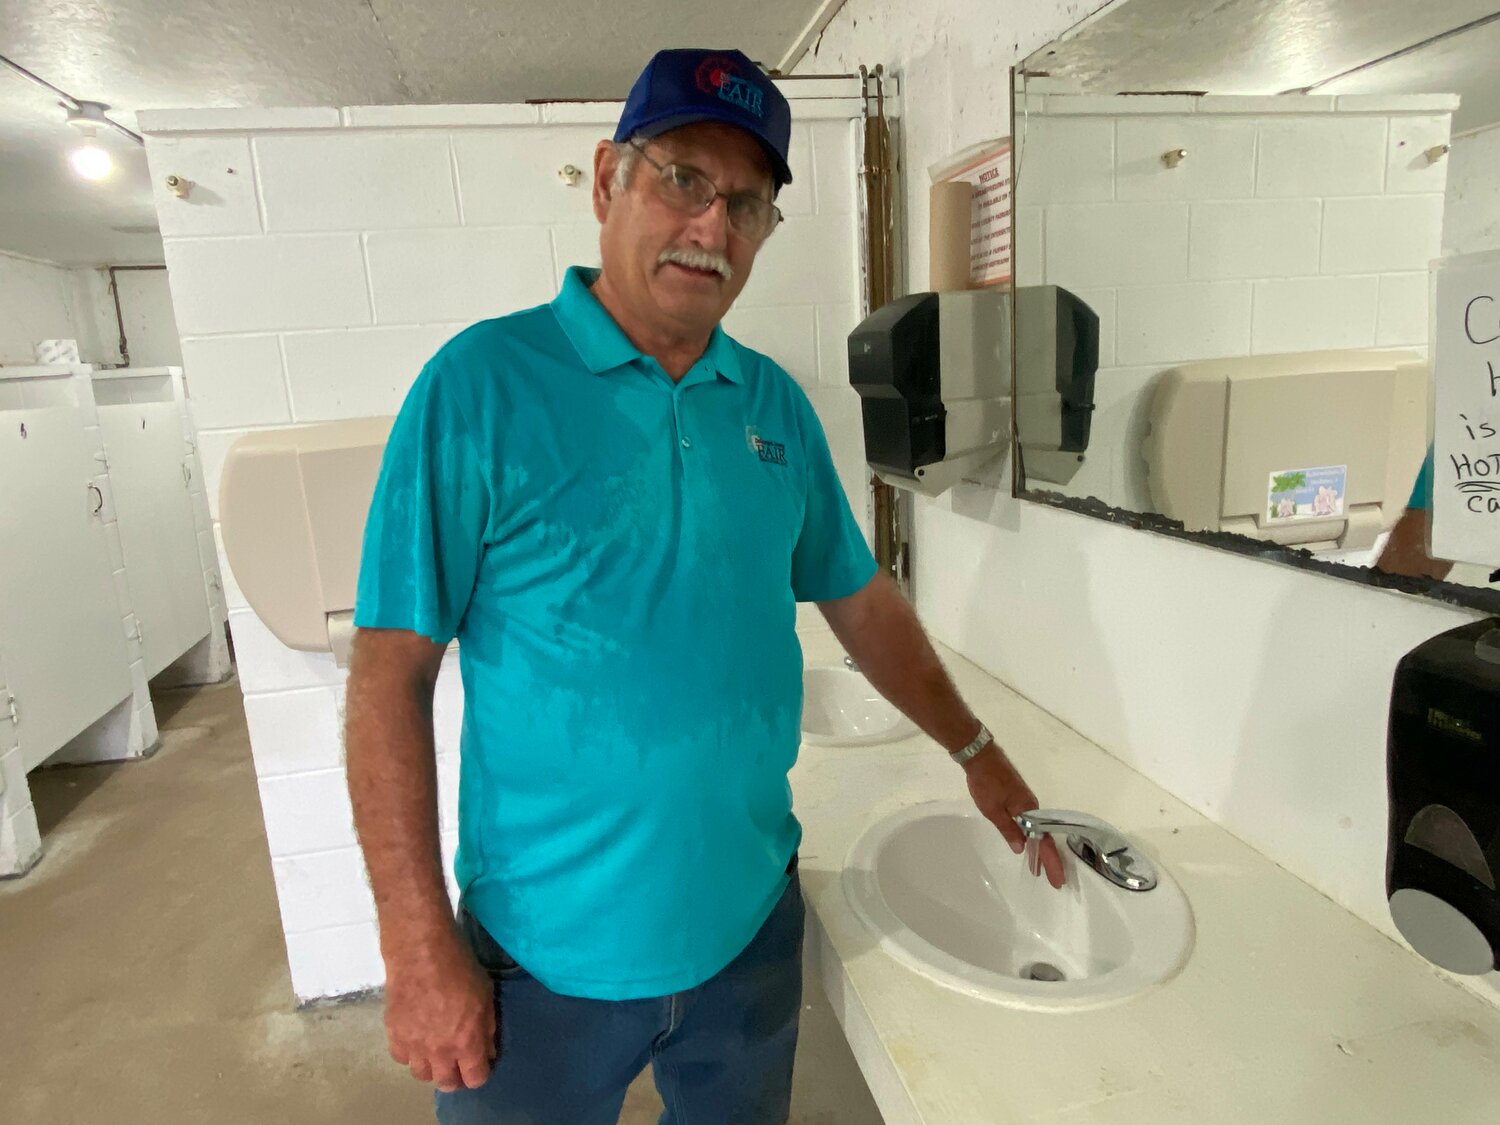 Motion sensors on new sink faucets are one of the upgrades on the Delaware County Fairgrounds.